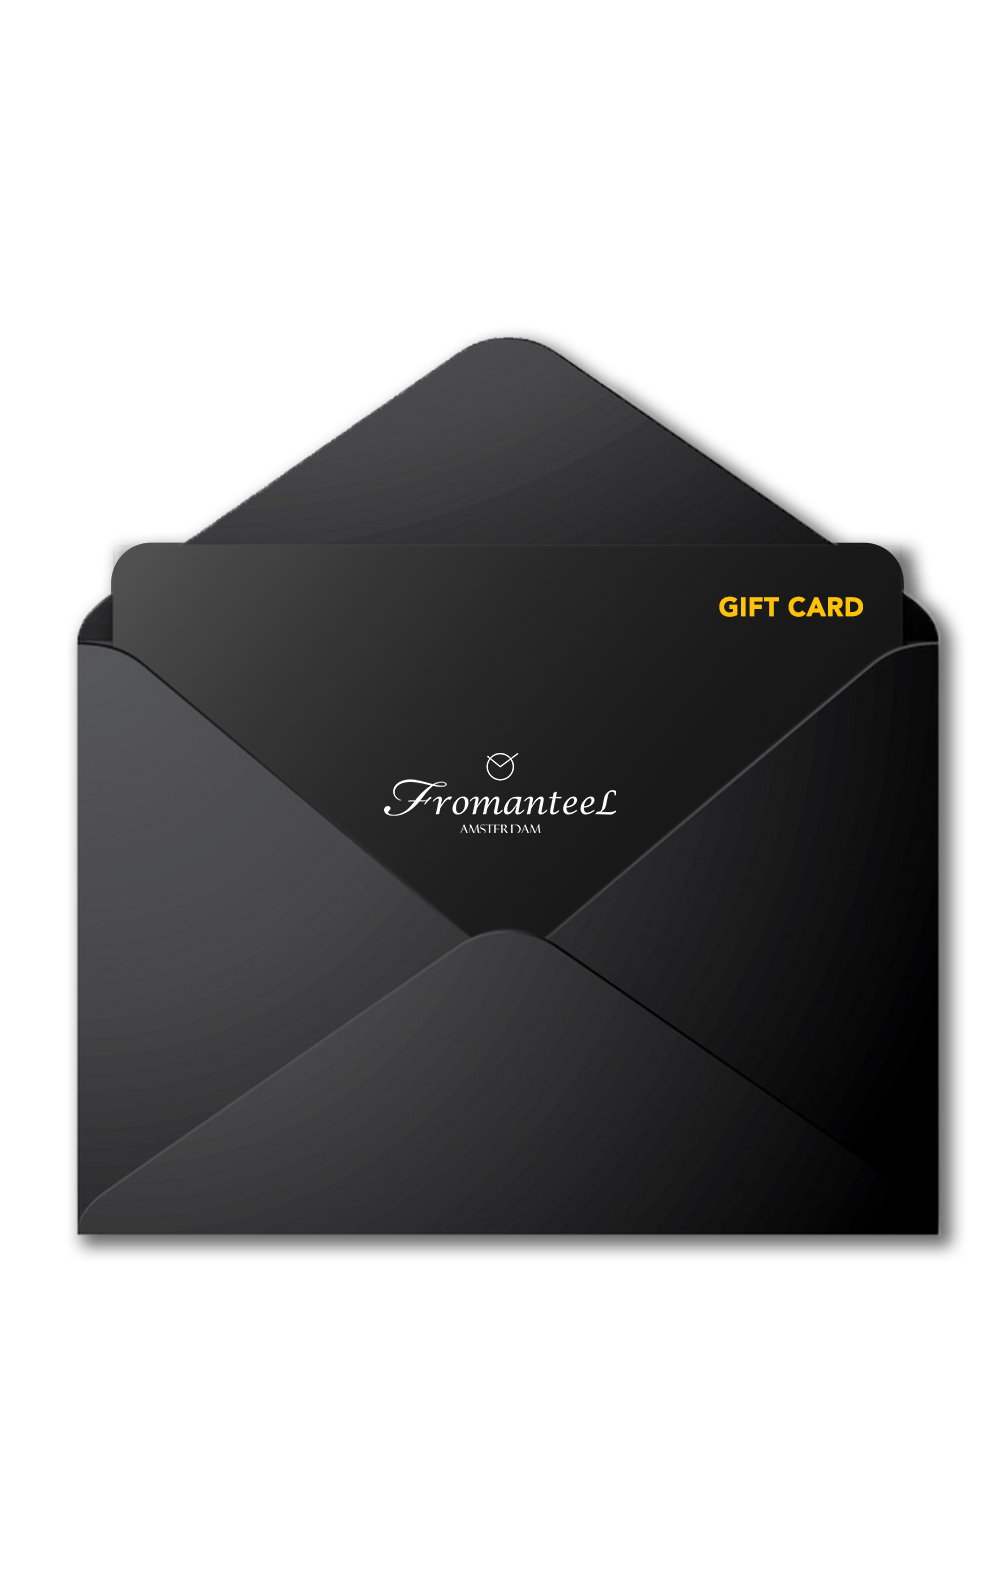 Fromanteel Gift Card